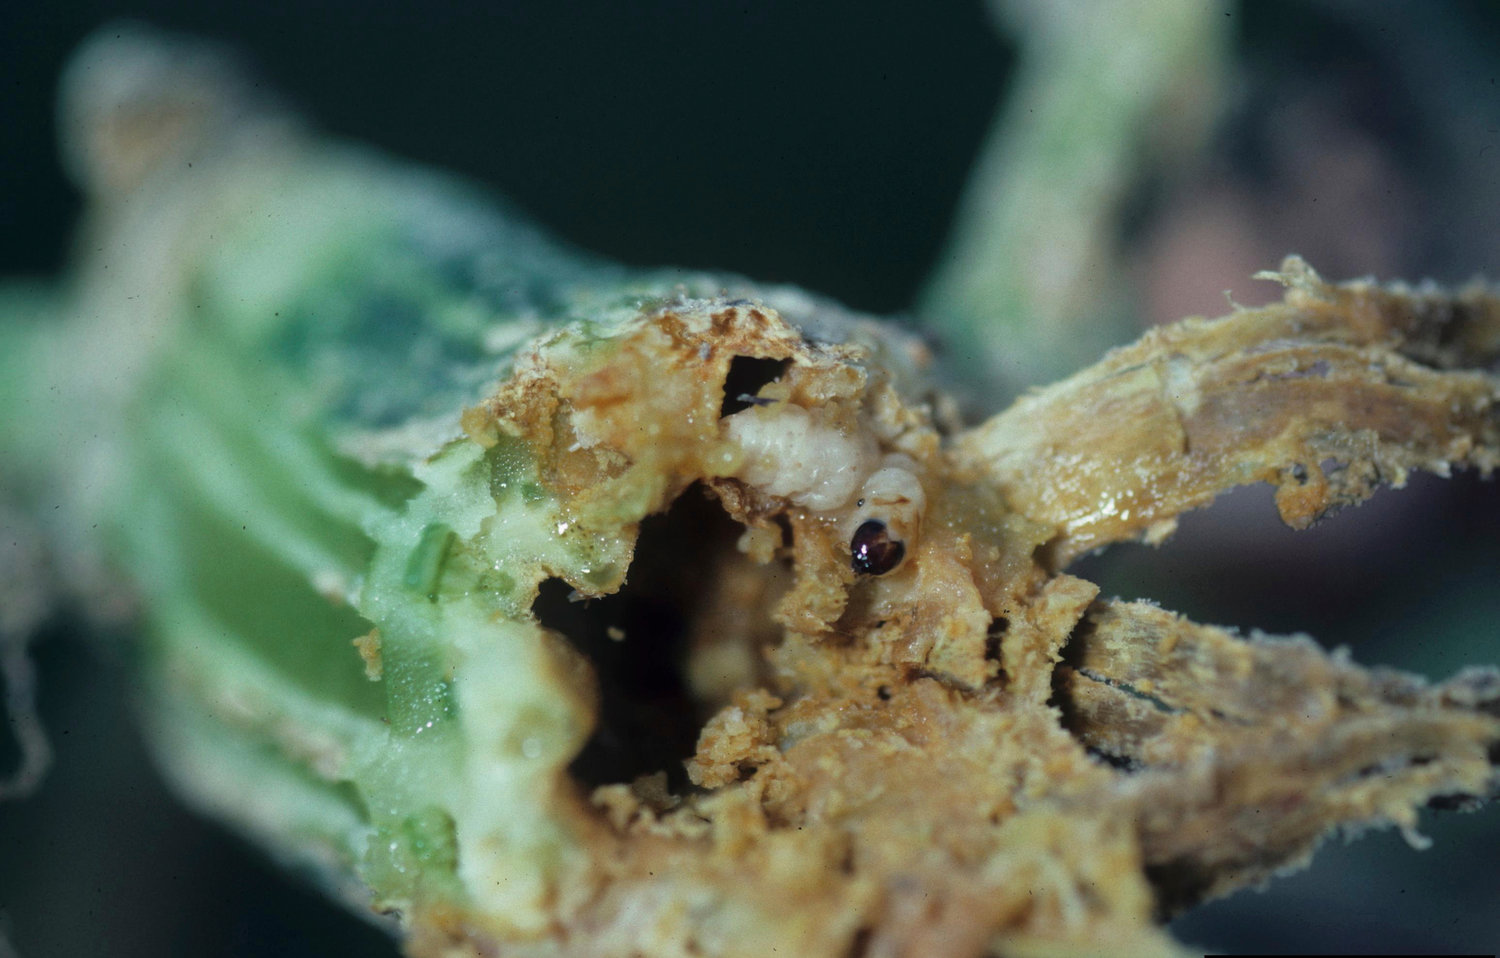 This image provided by Bugwood.org shows a squash vine borer larva and its telltale "frass" excrement inside a hollow squash stem. (Gerald Holmes, Strawberry Center, Cal Poly San Luis Obispo, Bugwood.org via AP)